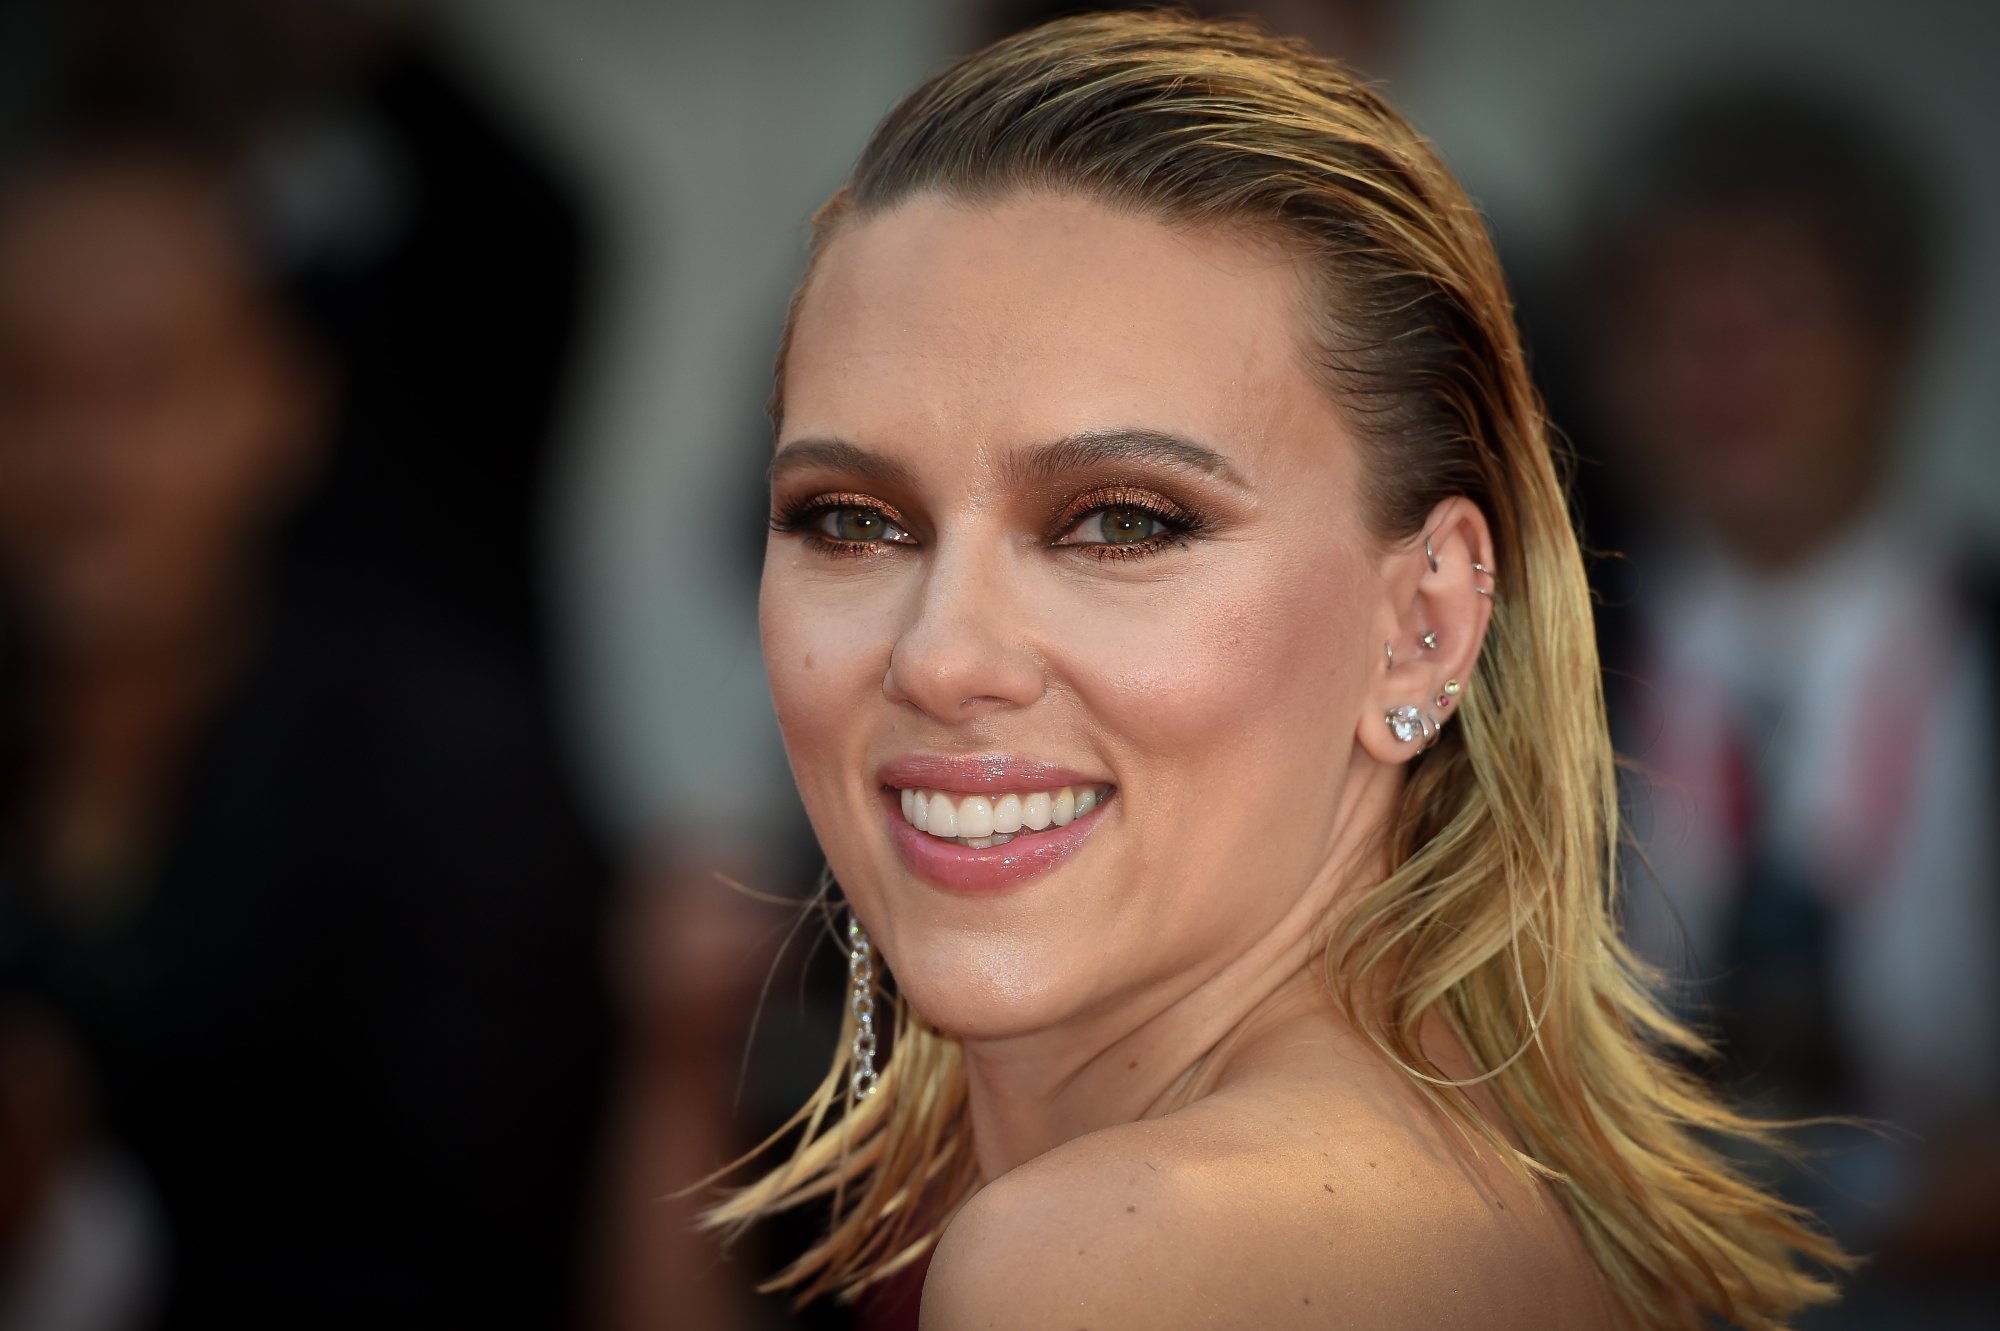 Scarlett Johansson Once Thought She Came Off as a ‘Psycho’ First Meeting Patrick Swayze at the Oscars